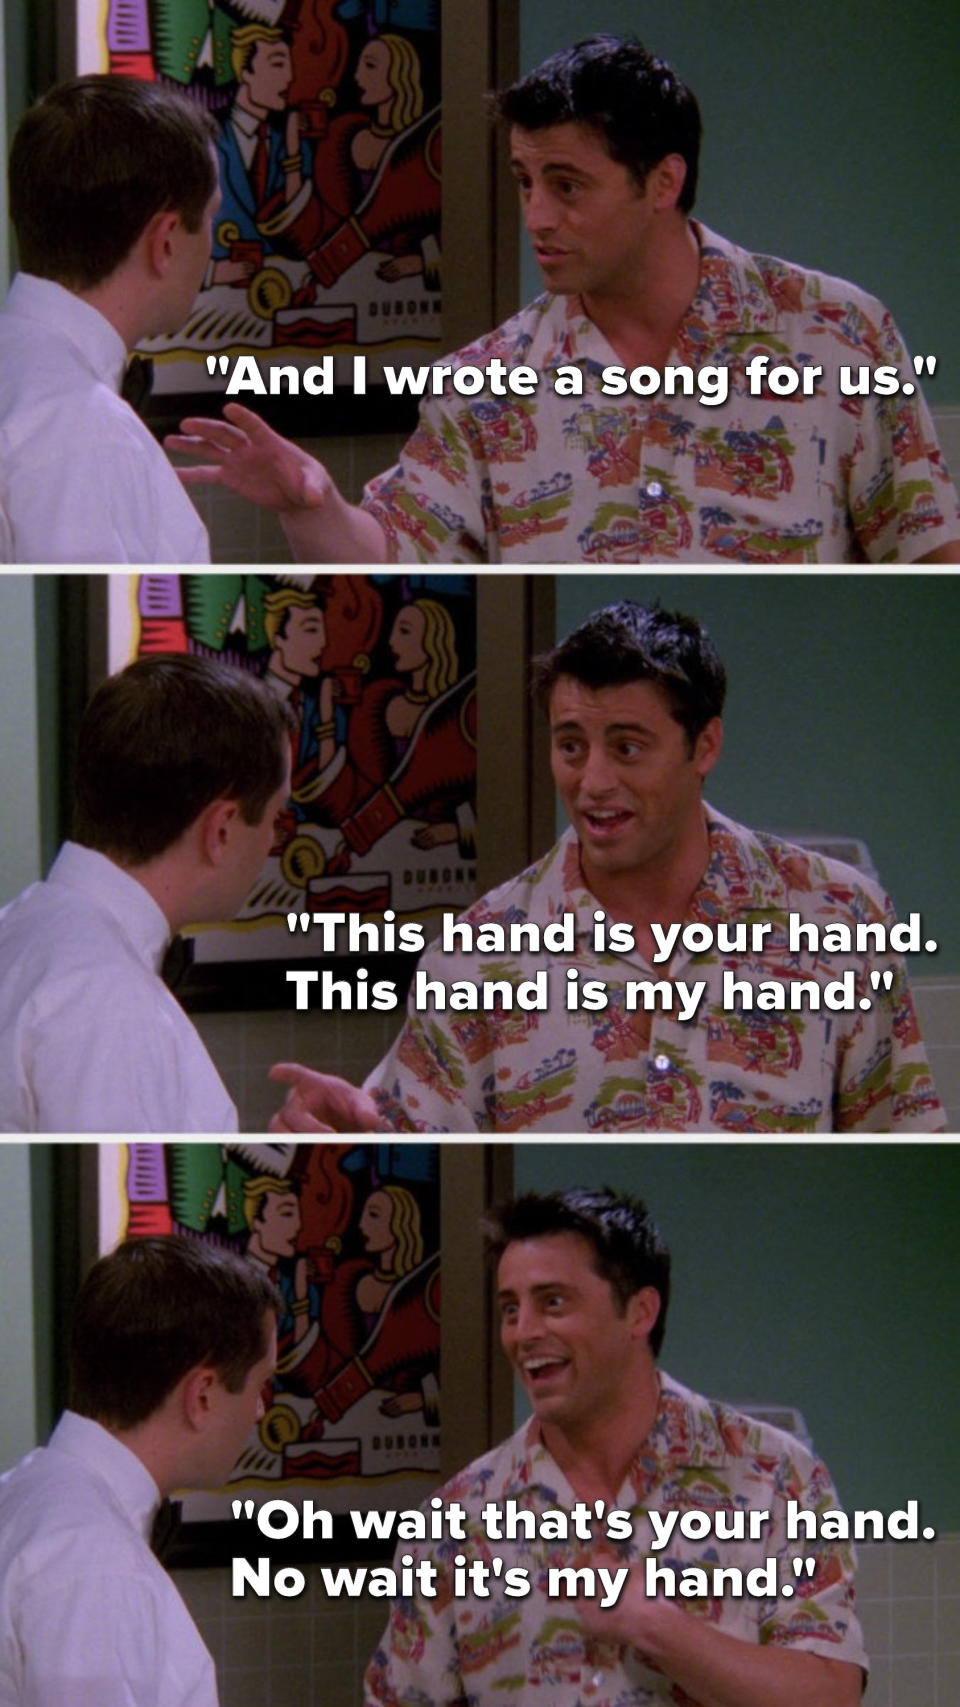 Joey says, "And I wrote a song for us, this hand is your hand, this hand is my hand, oh wait that's your hand, no wait it's my hand"